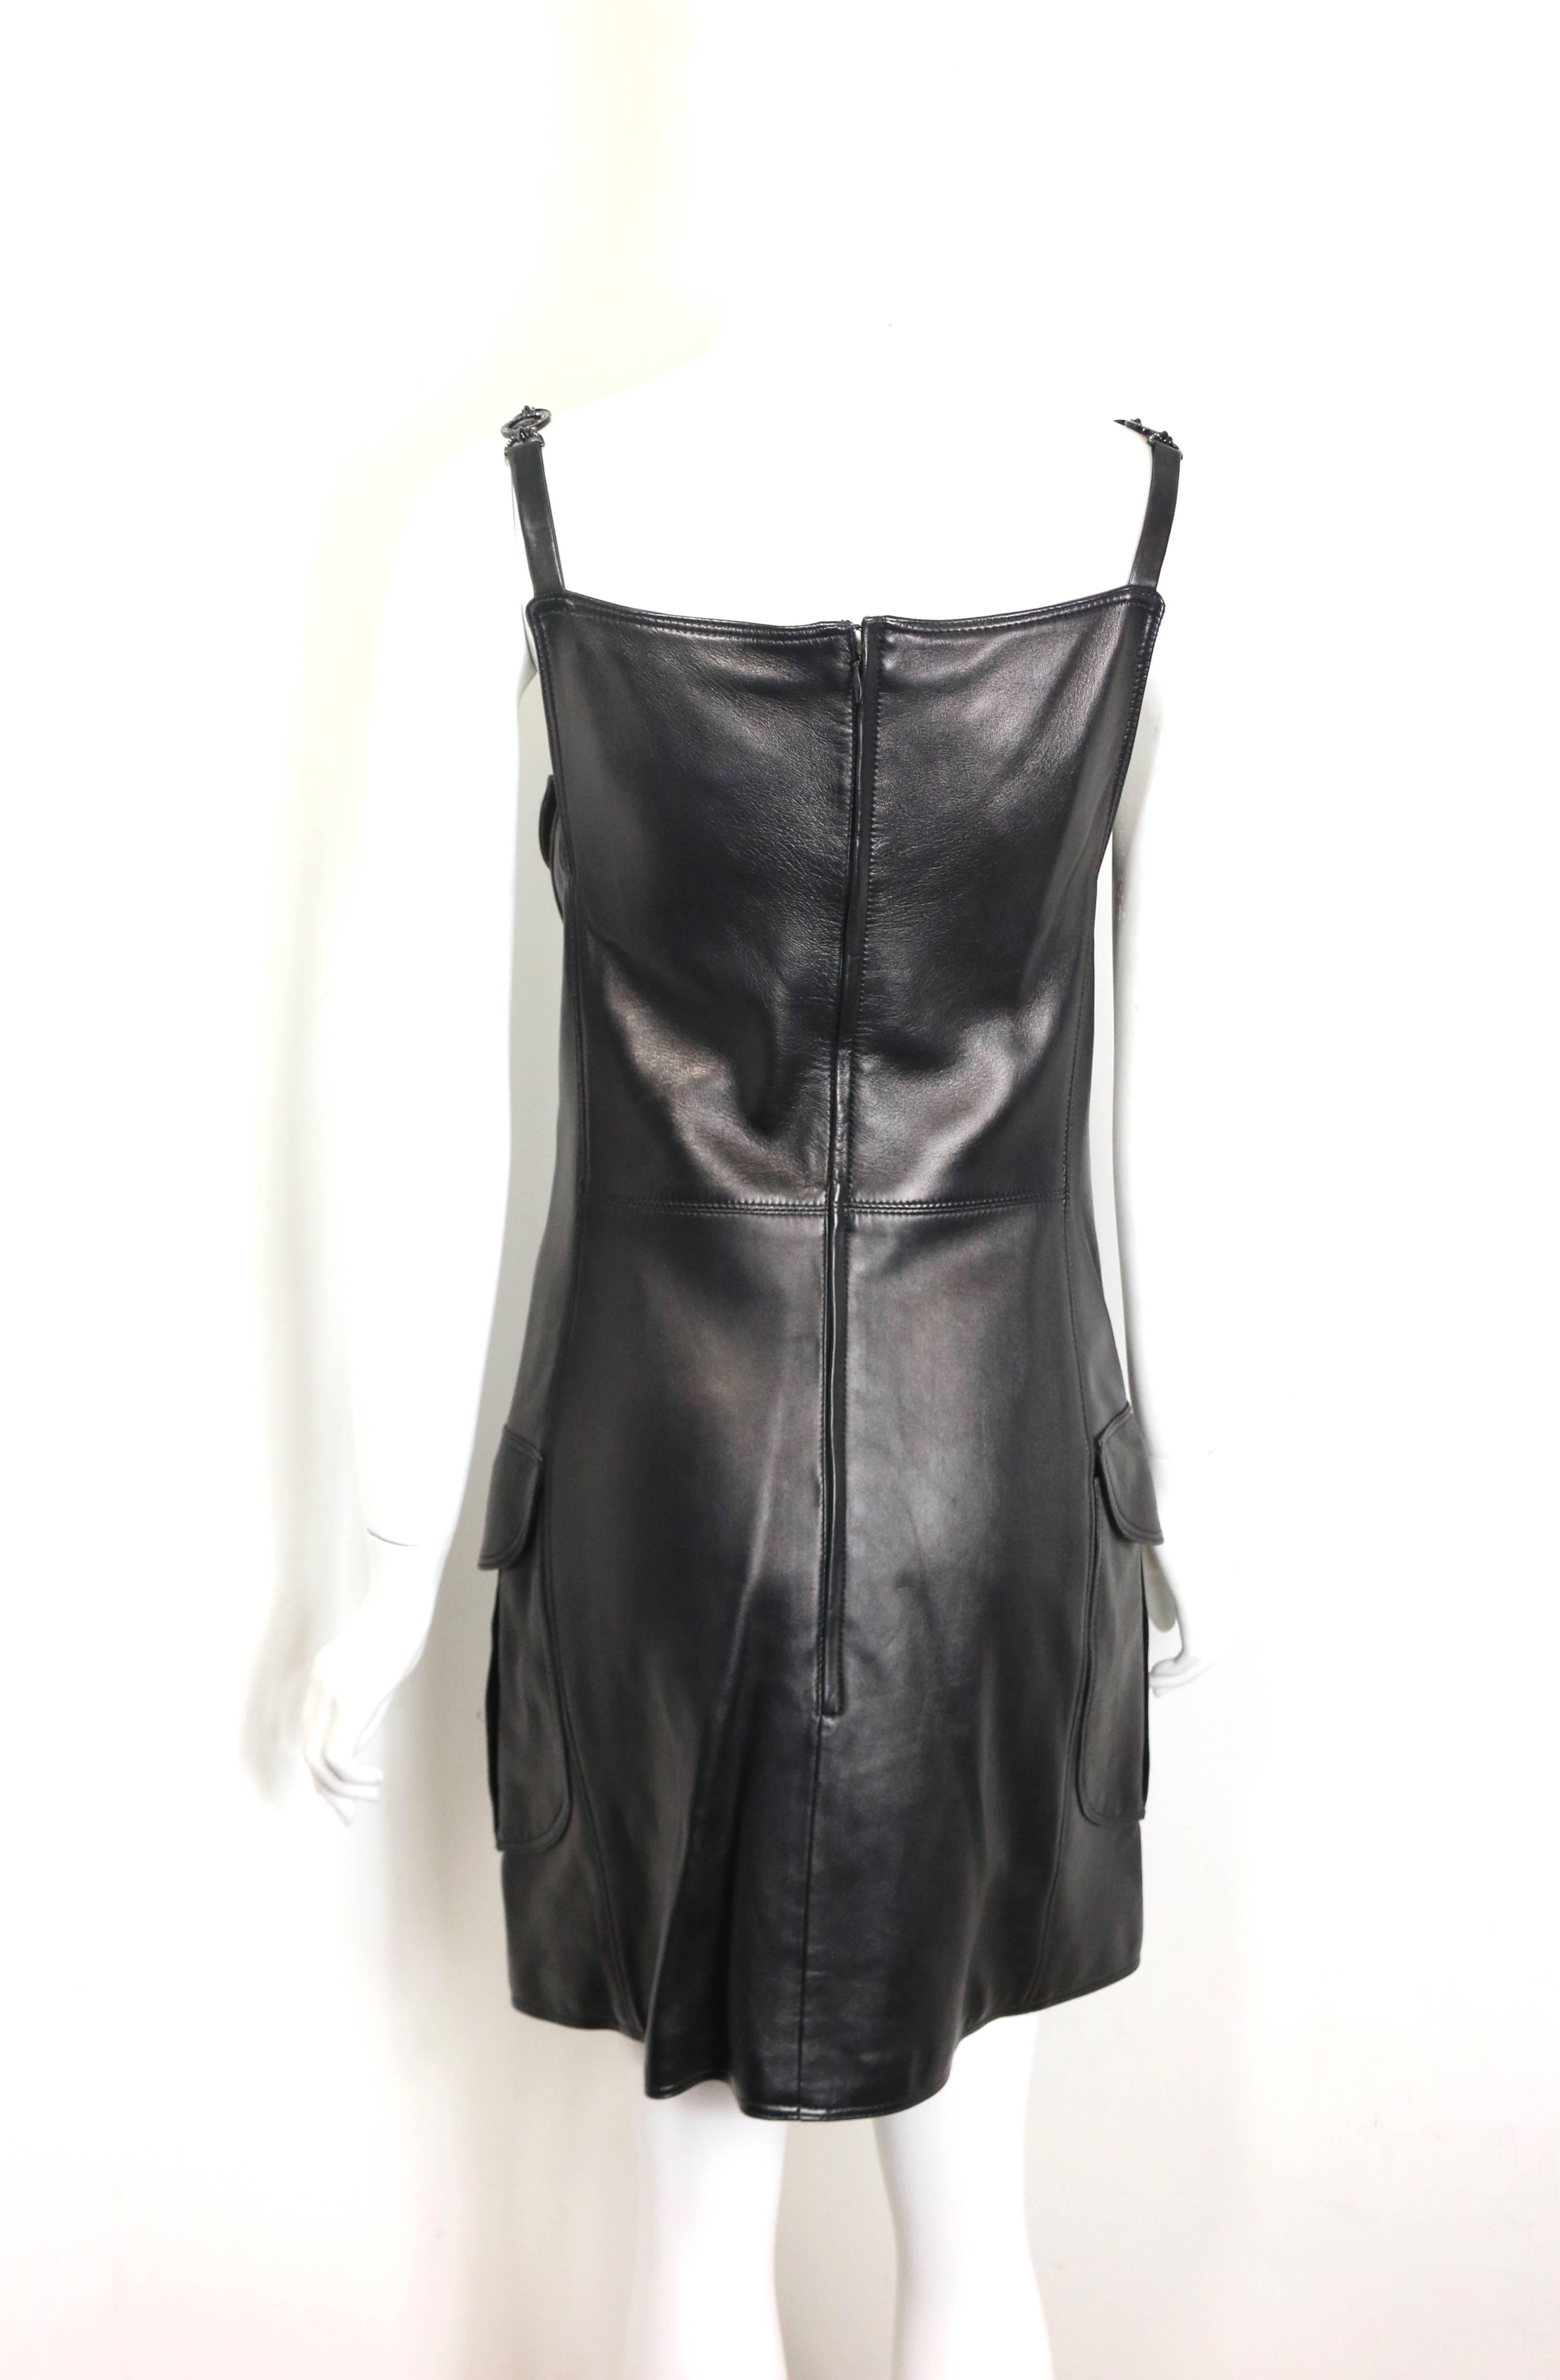 Iconic Gianni Versace Black Lambskin Leather Medusa Sleeveless Dress  In Excellent Condition For Sale In Sheung Wan, HK